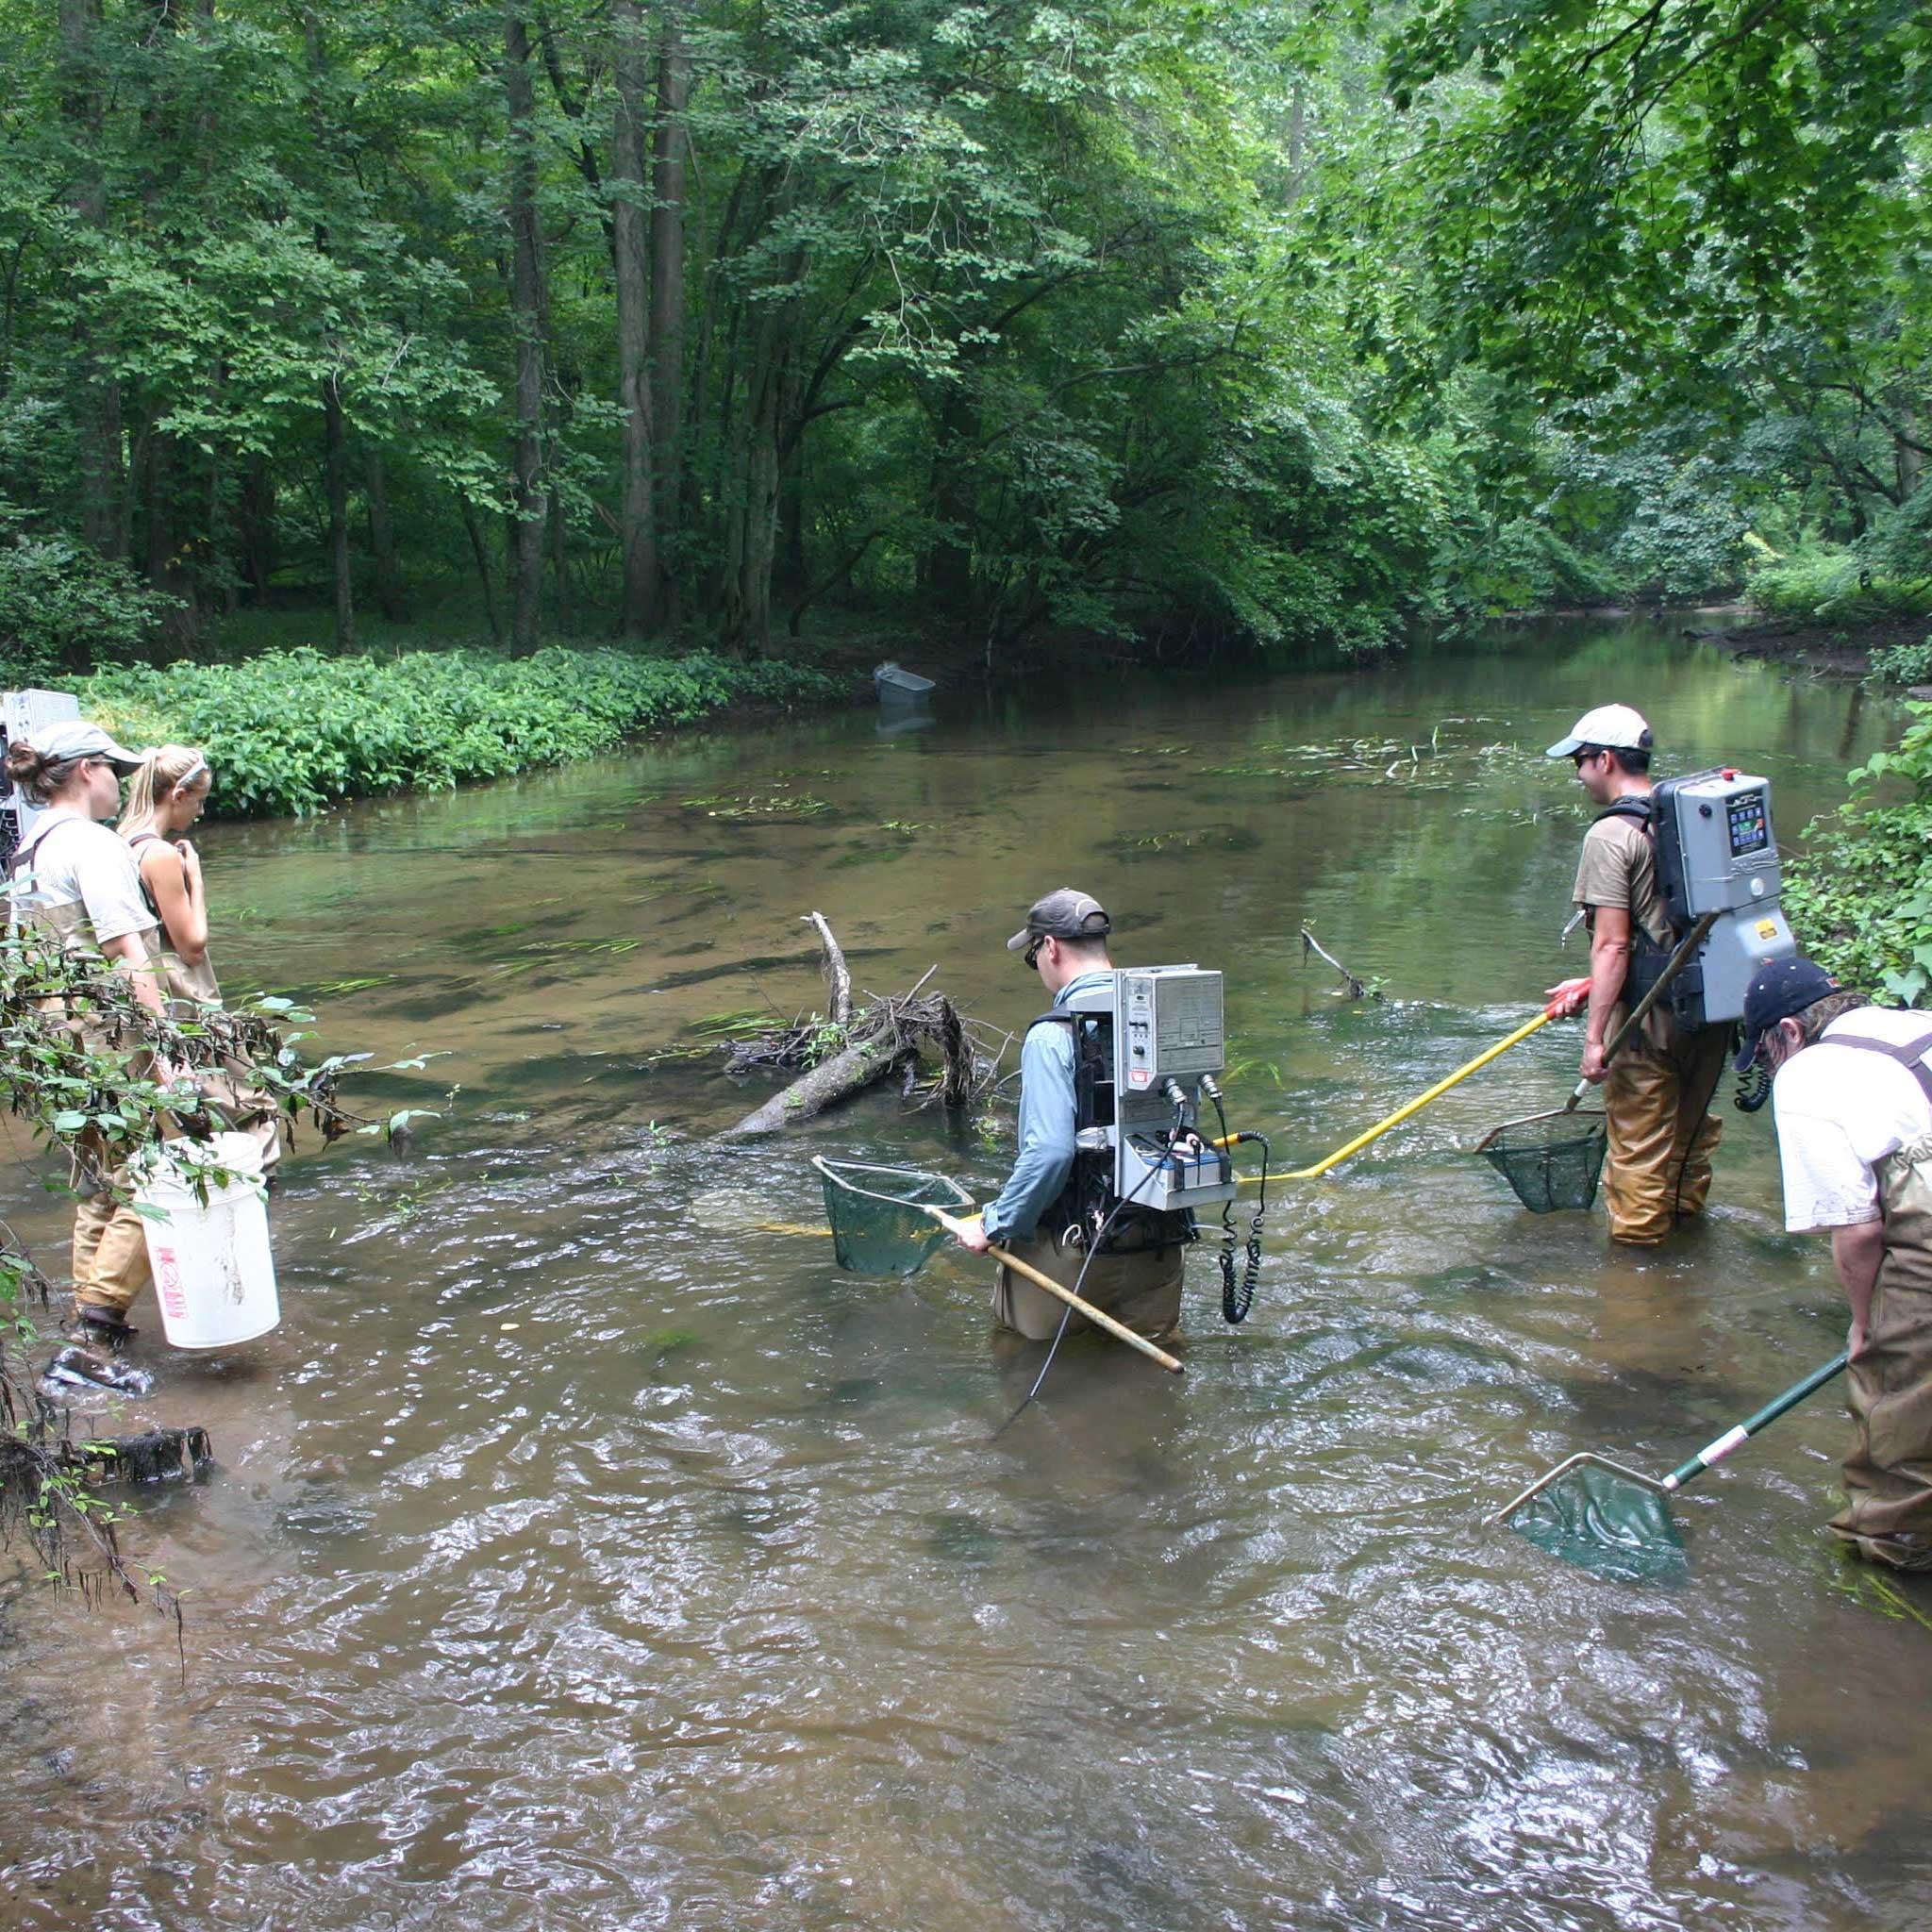 Students in a stream conducting research